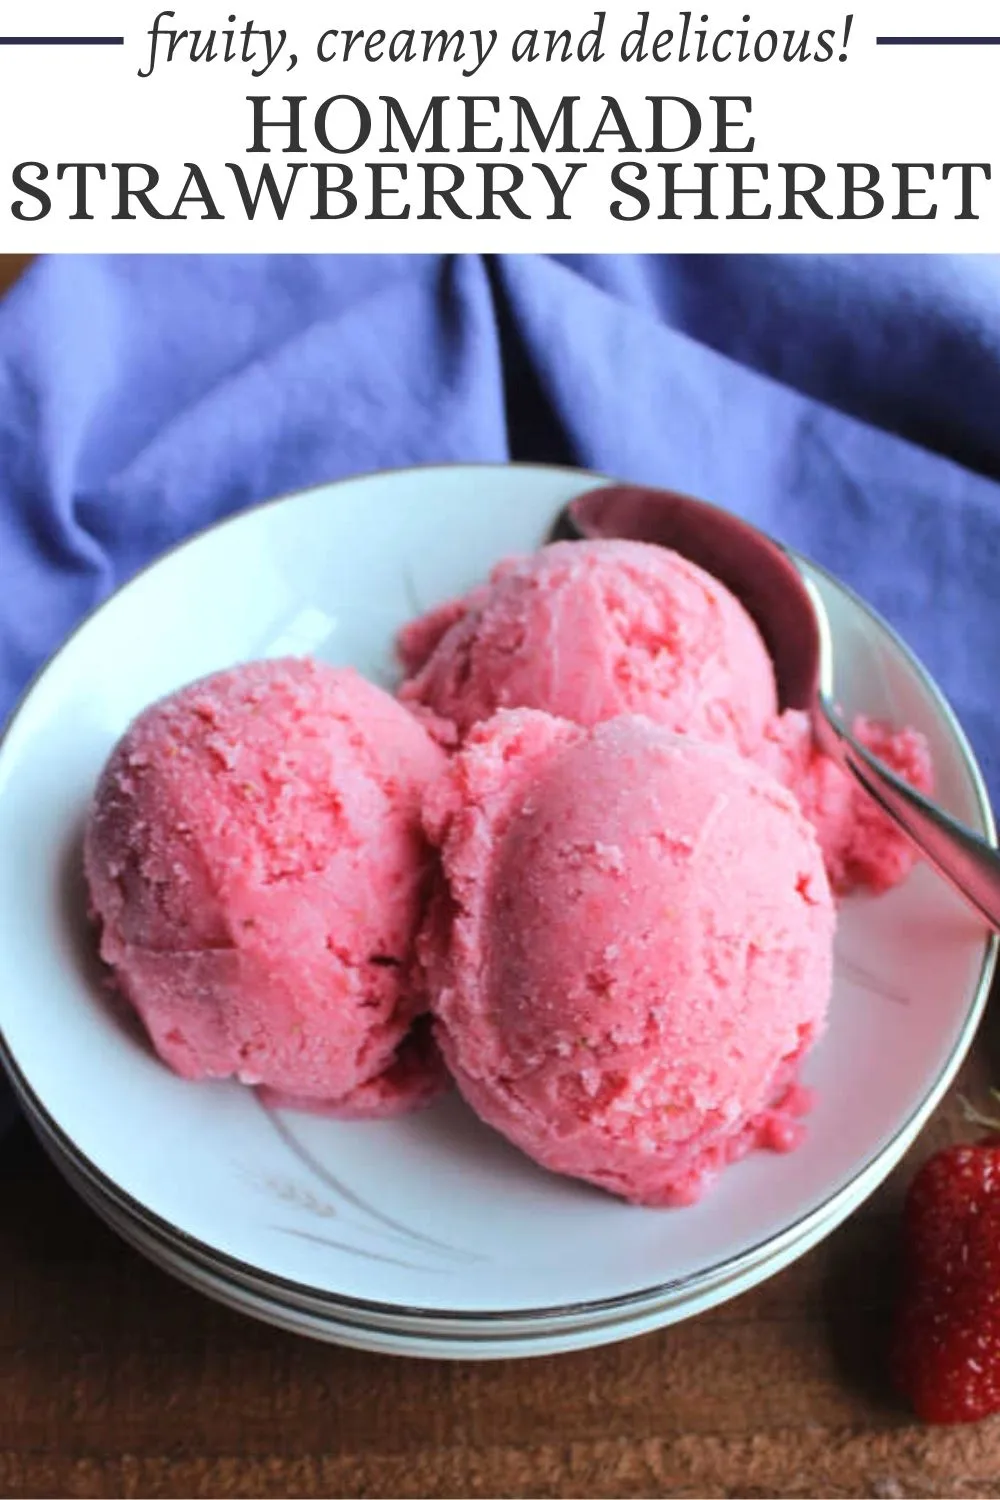 Strawberries are really the shining star in this frozen treat.  Sherbet is the perfect balance between lots of fruit and just enough dairy to give you a creamy texture. It is the perfect way to cool off on a hot day. Luckily it takes very few ingredients so you'll be churning away in no time!